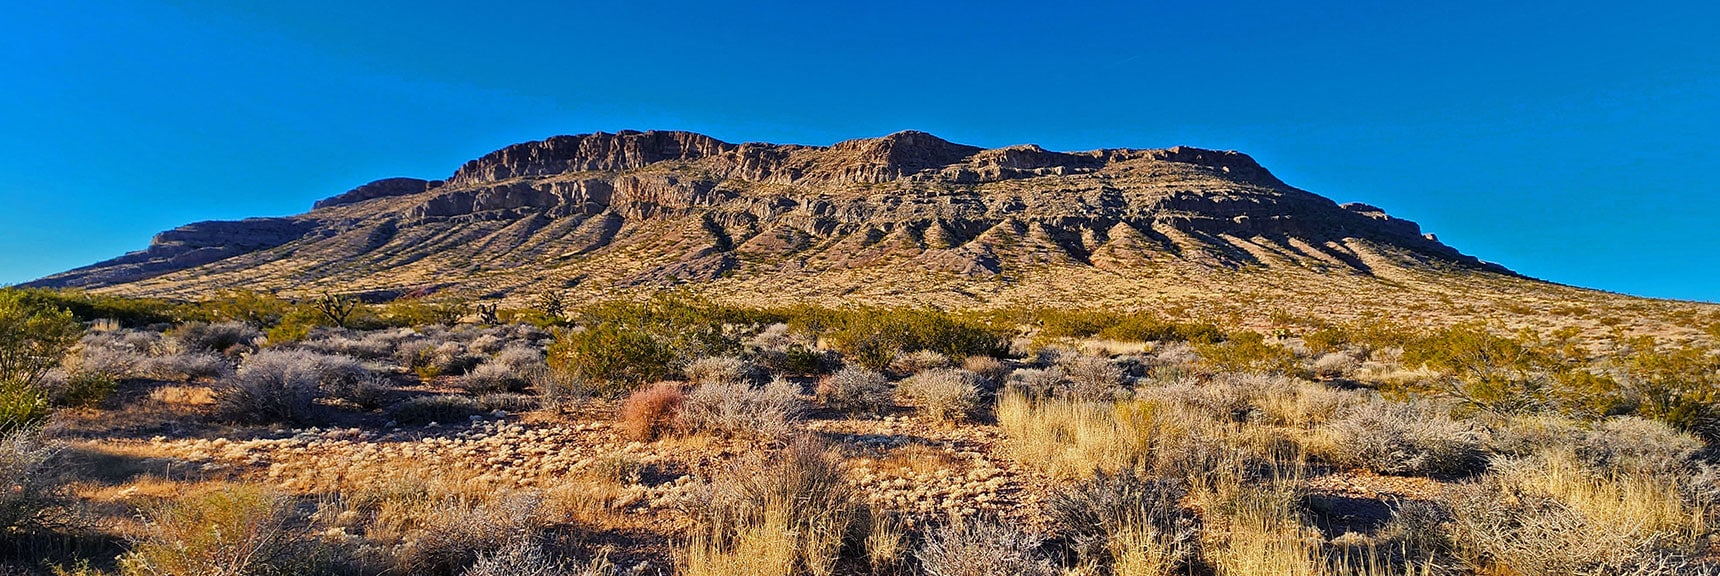 Large View of Southern Side of the Bluff | Landmark Bluff | Lovell Canyon, Nevada